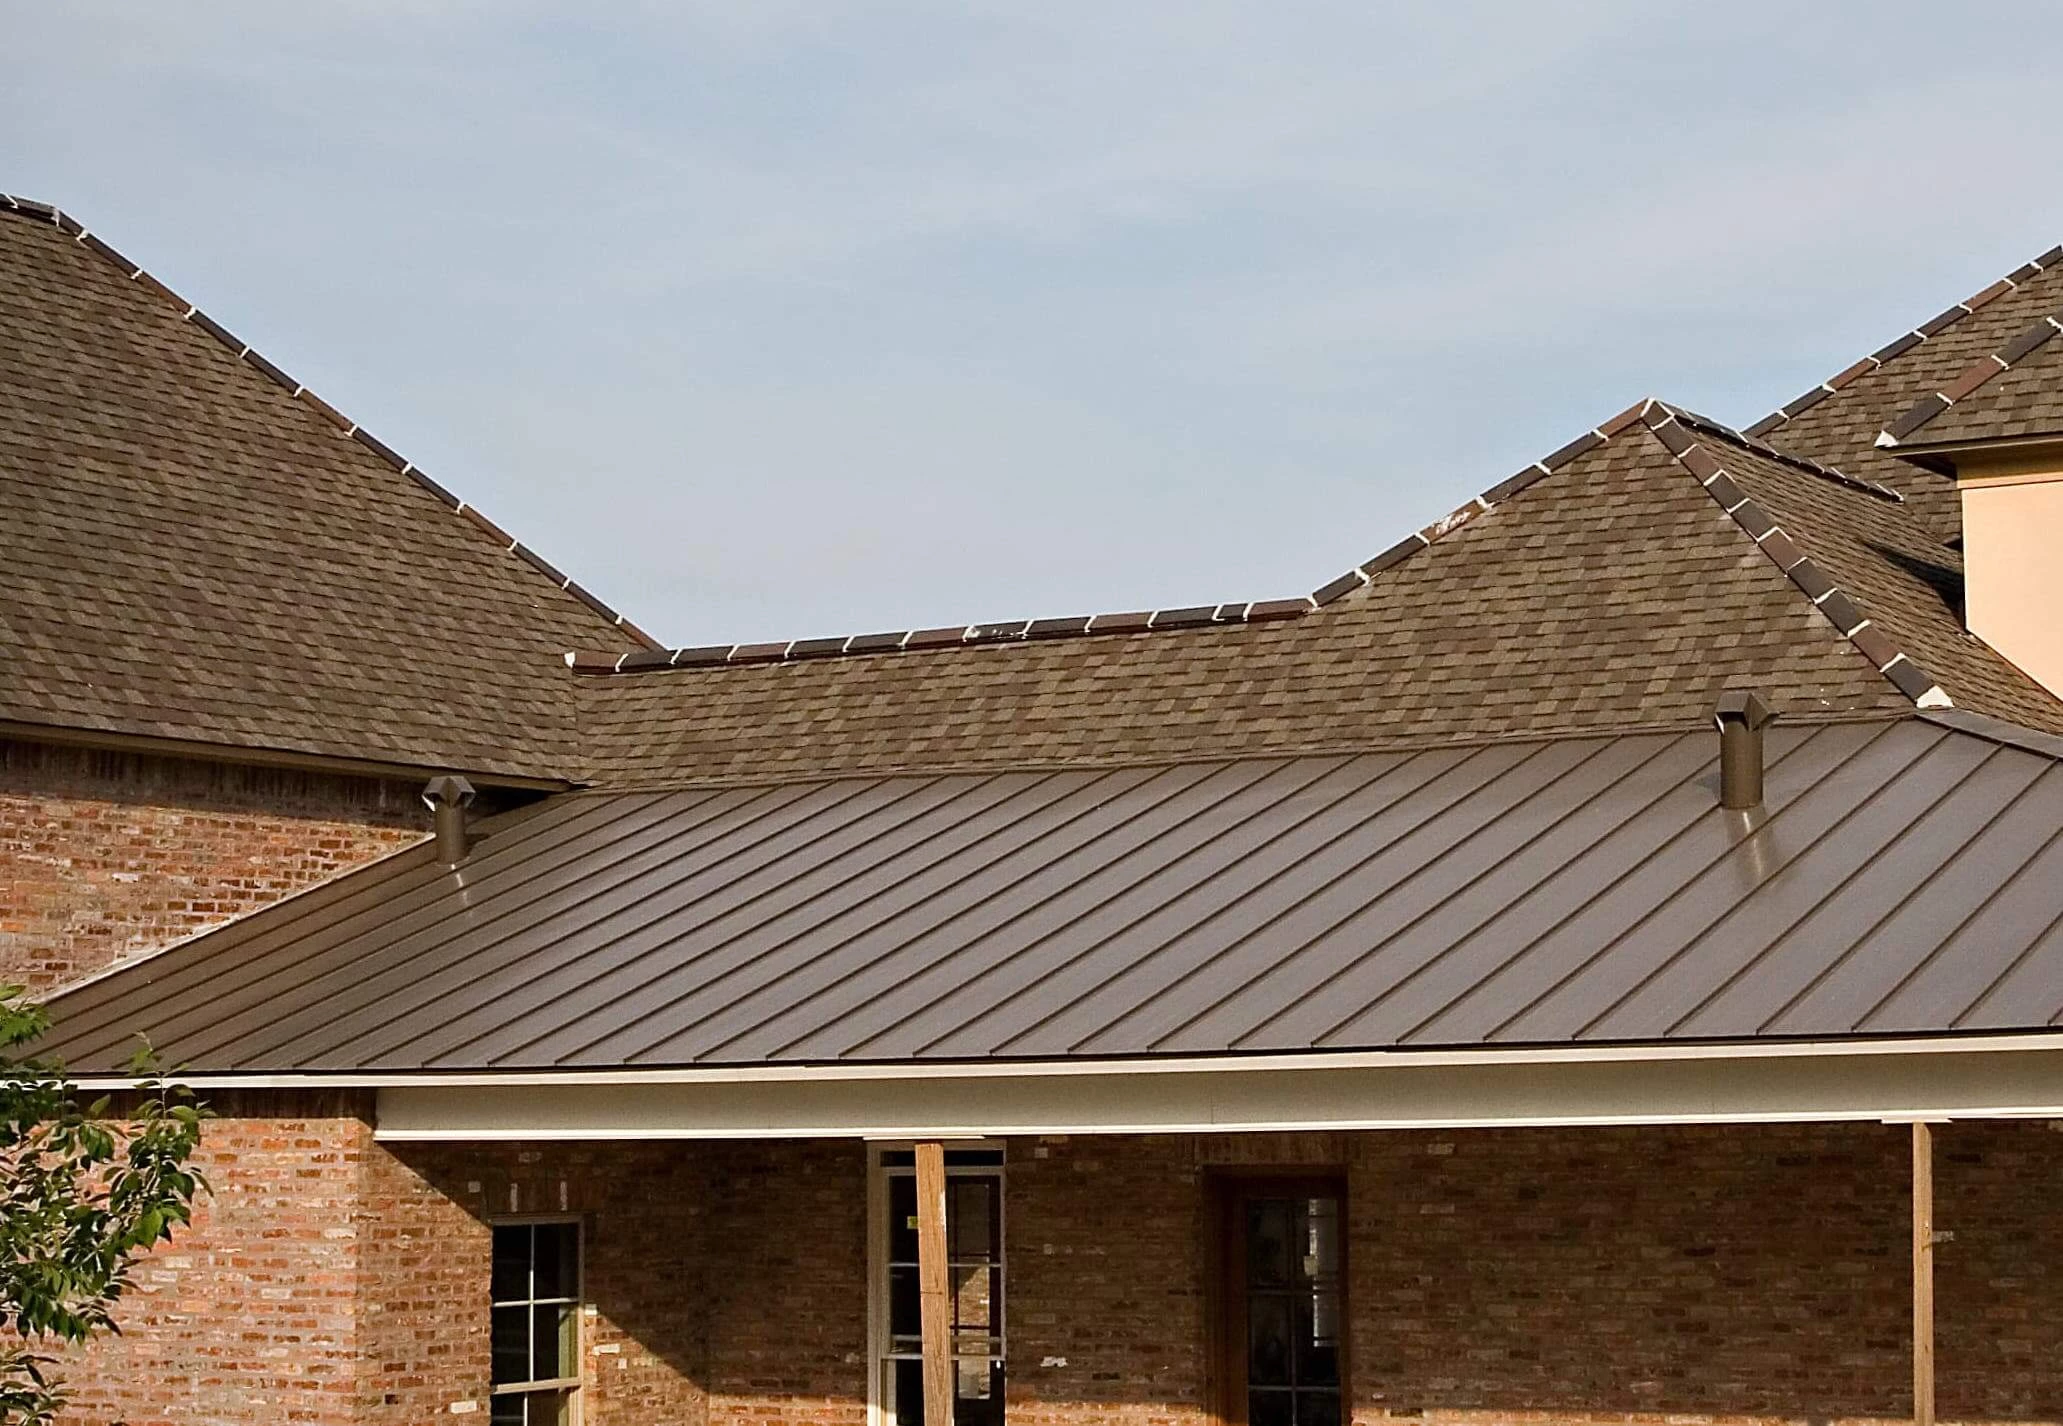 The Increasing Popularity of Metal Roofs